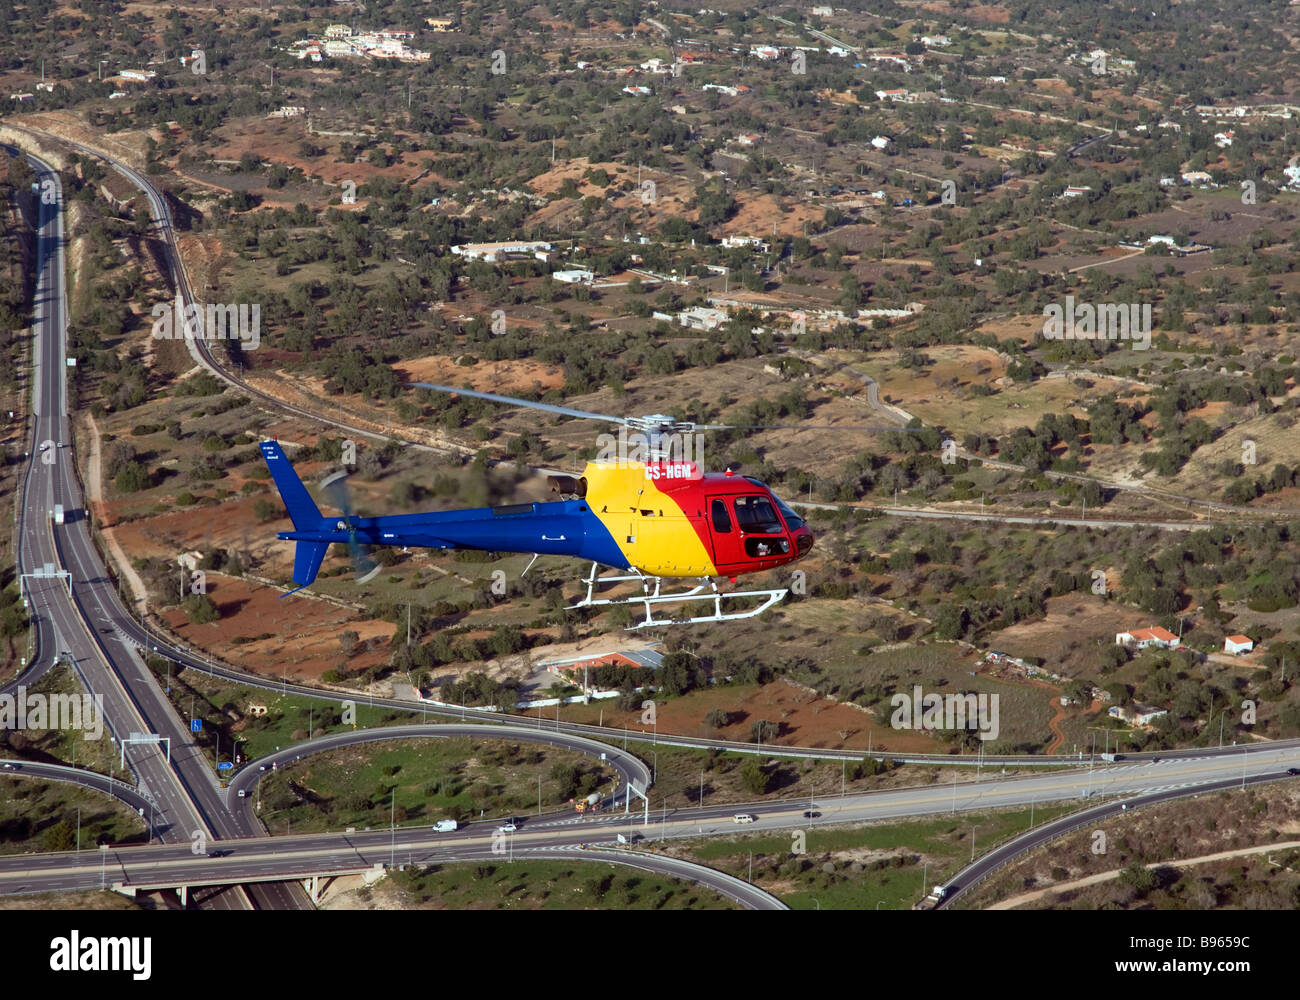 A multipurpose helicopter in colourful livery flies over the A22 motorway and a railway line in the Algarve, southern Portugal Stock Photo